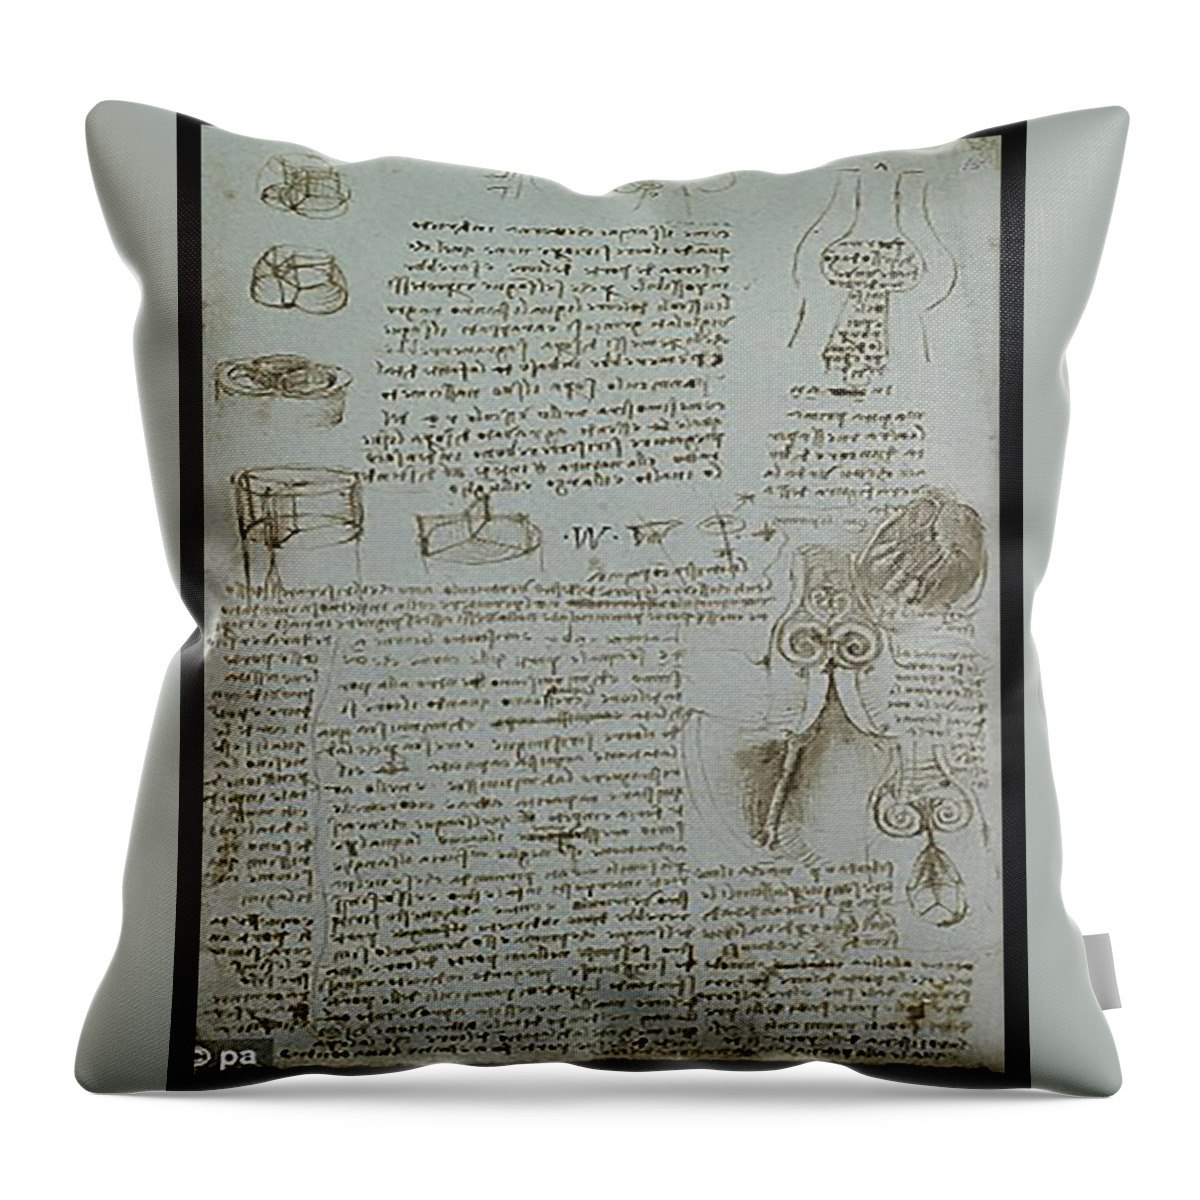 Copyright 2015 � James Christopher Hill Throw Pillow featuring the painting Human study notes by James Hill